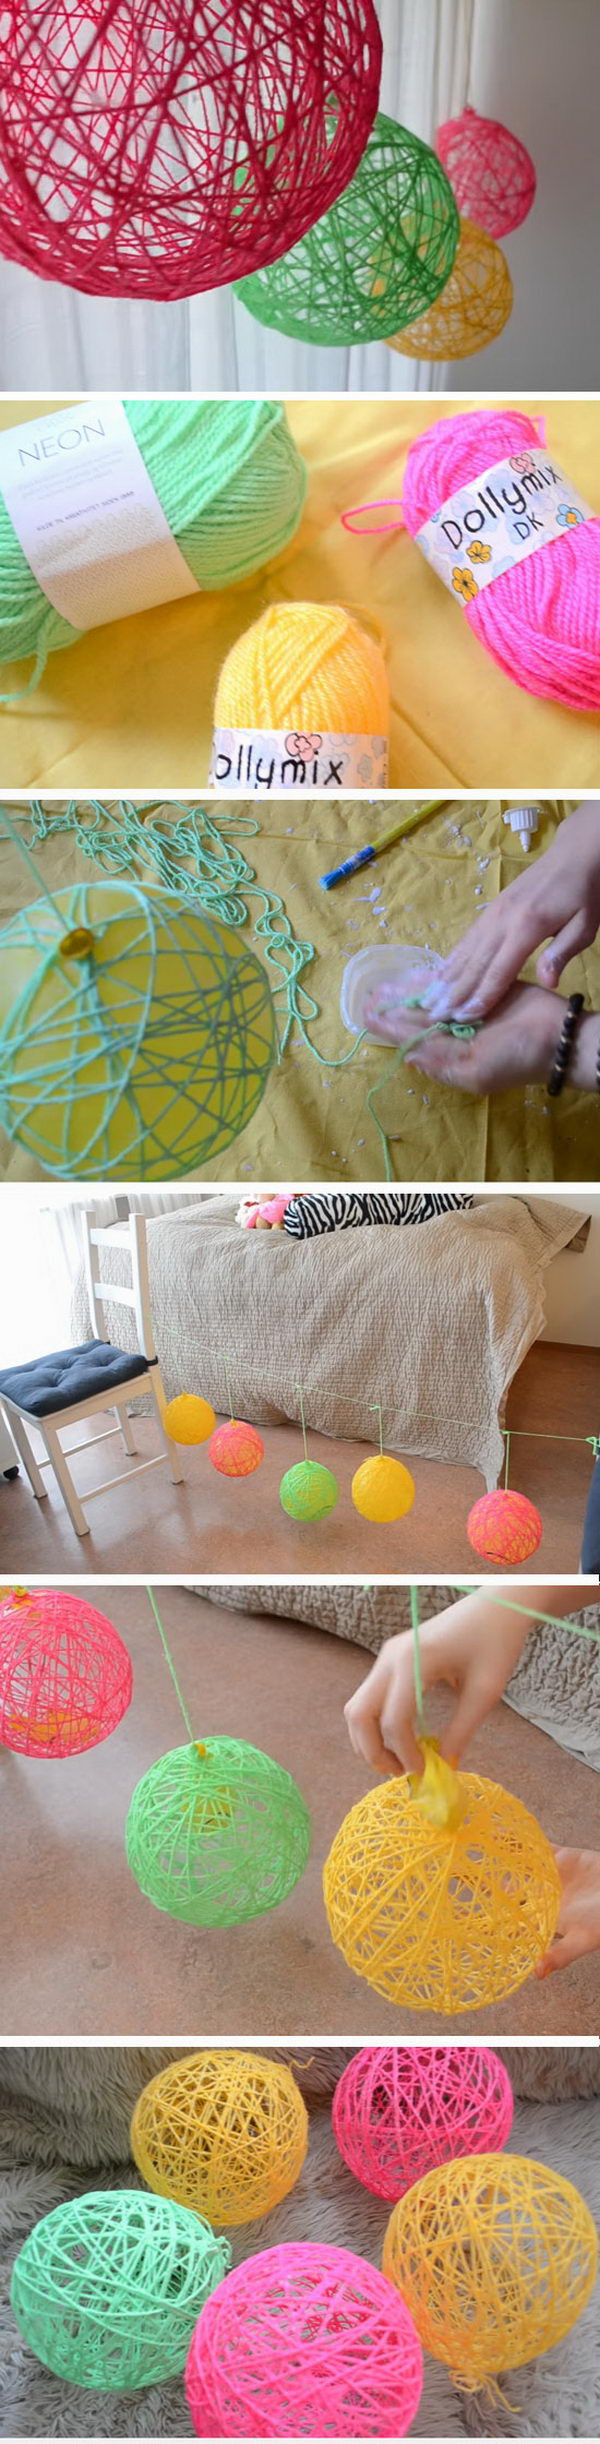 Summer Projects Ideas
 25 Fun & Easy Summer DIY Projects Hative